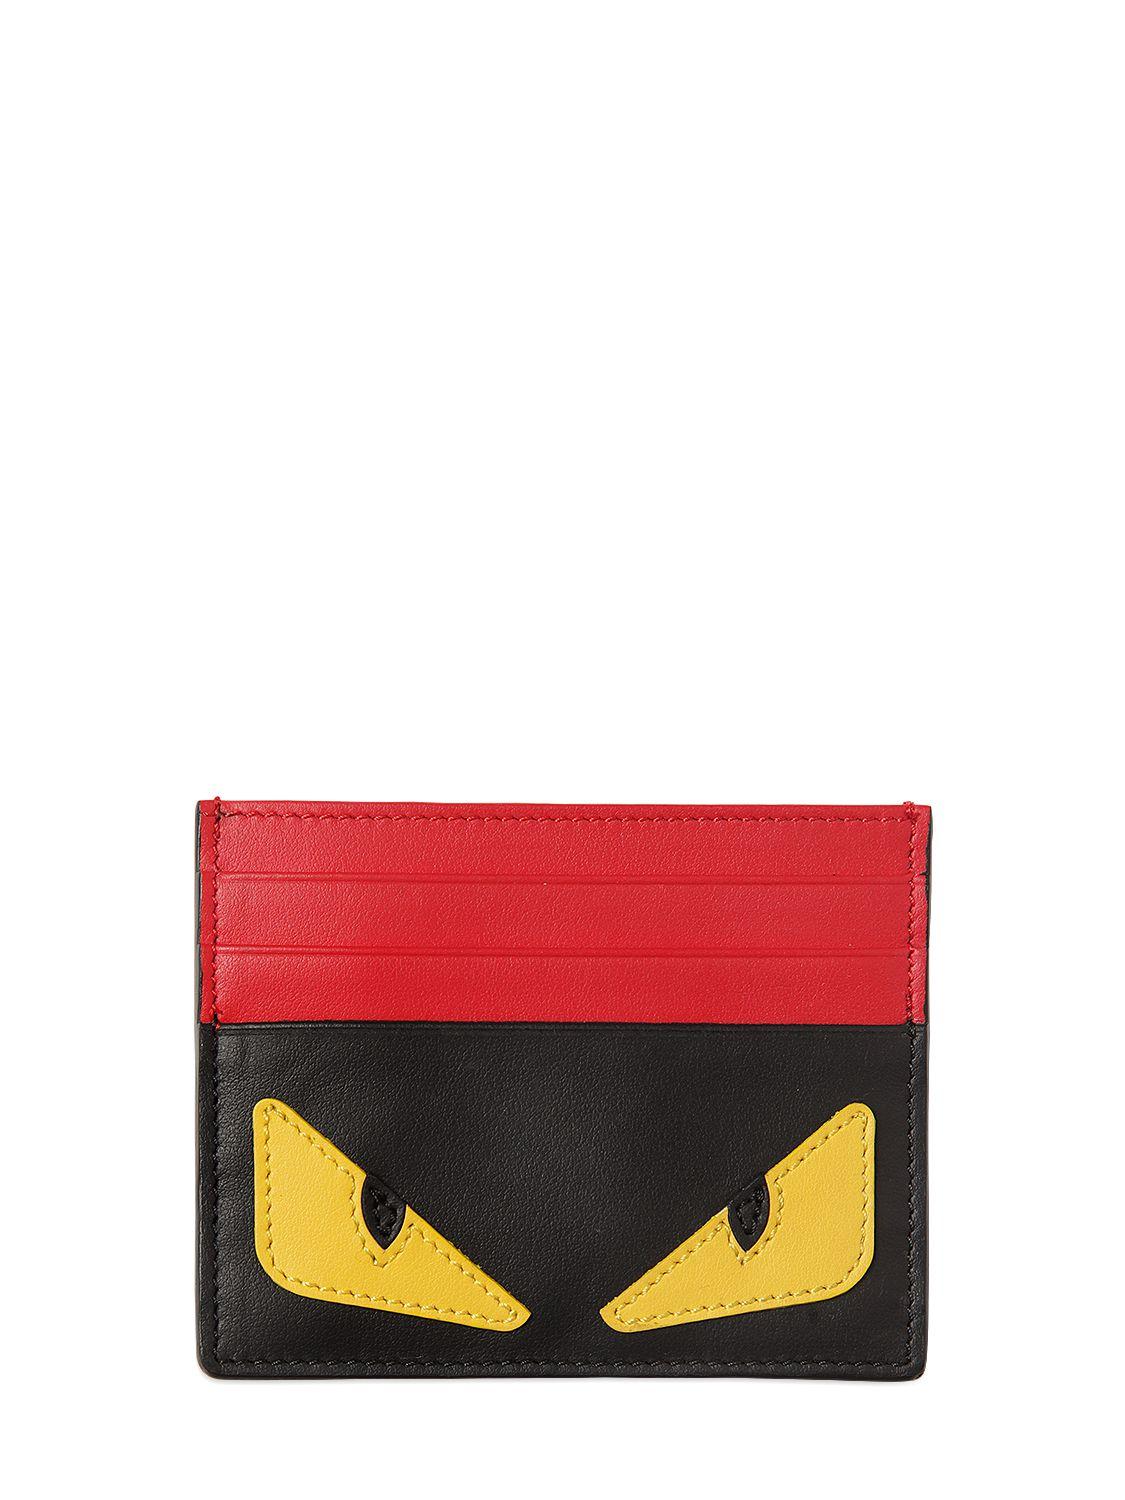 Fendi Monster Smooth Leather Card Holder in Red for Men | Lyst